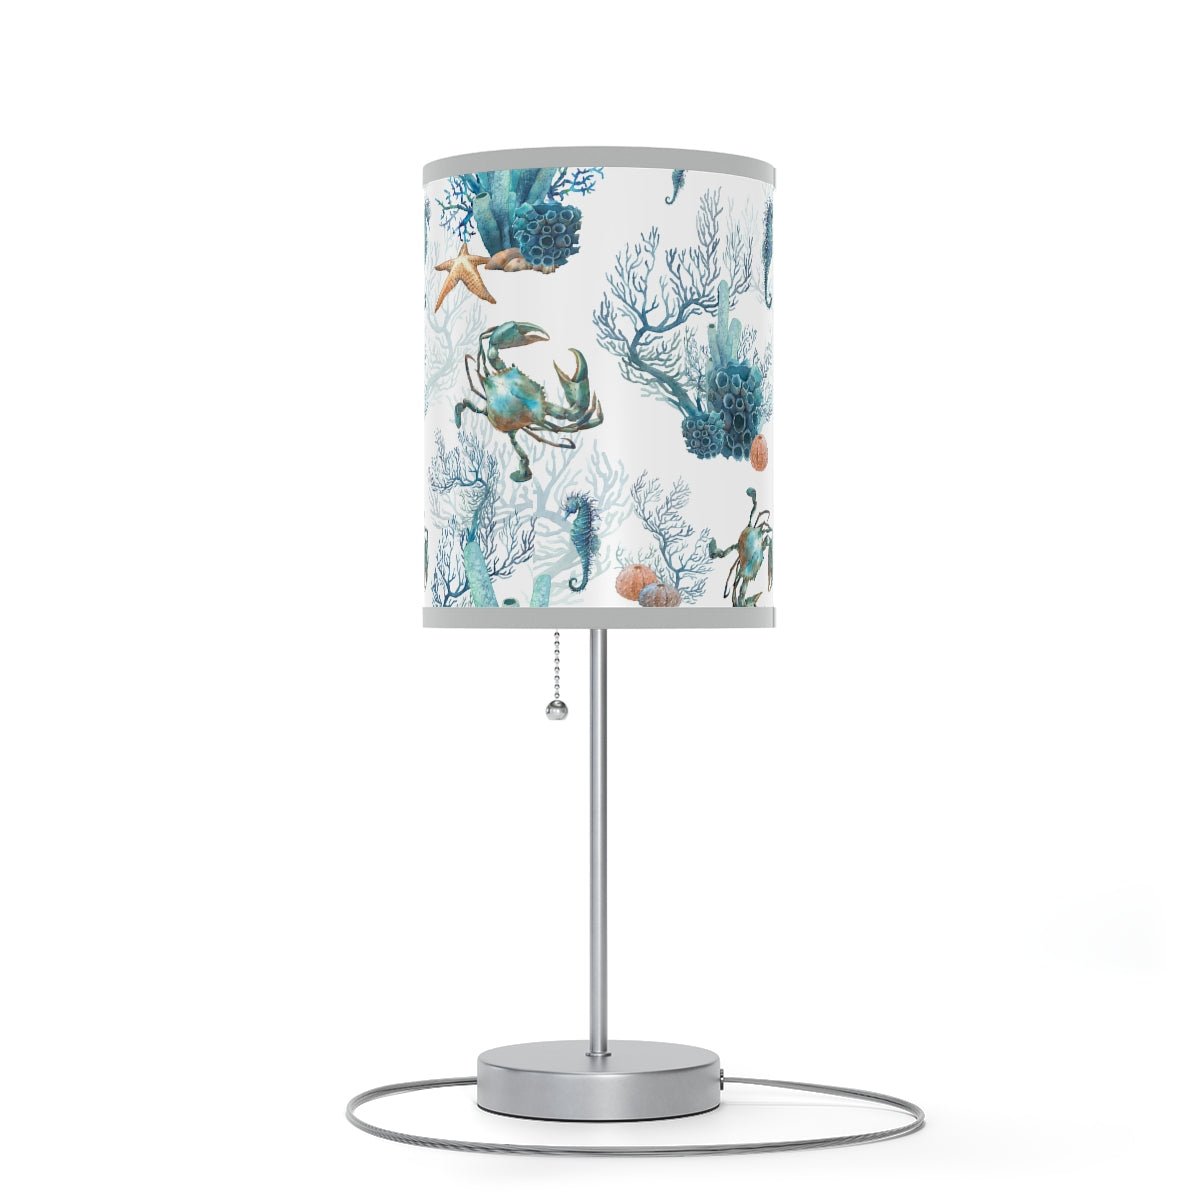 Watercolor Coral Reef Table Lamp - Puffin Lime